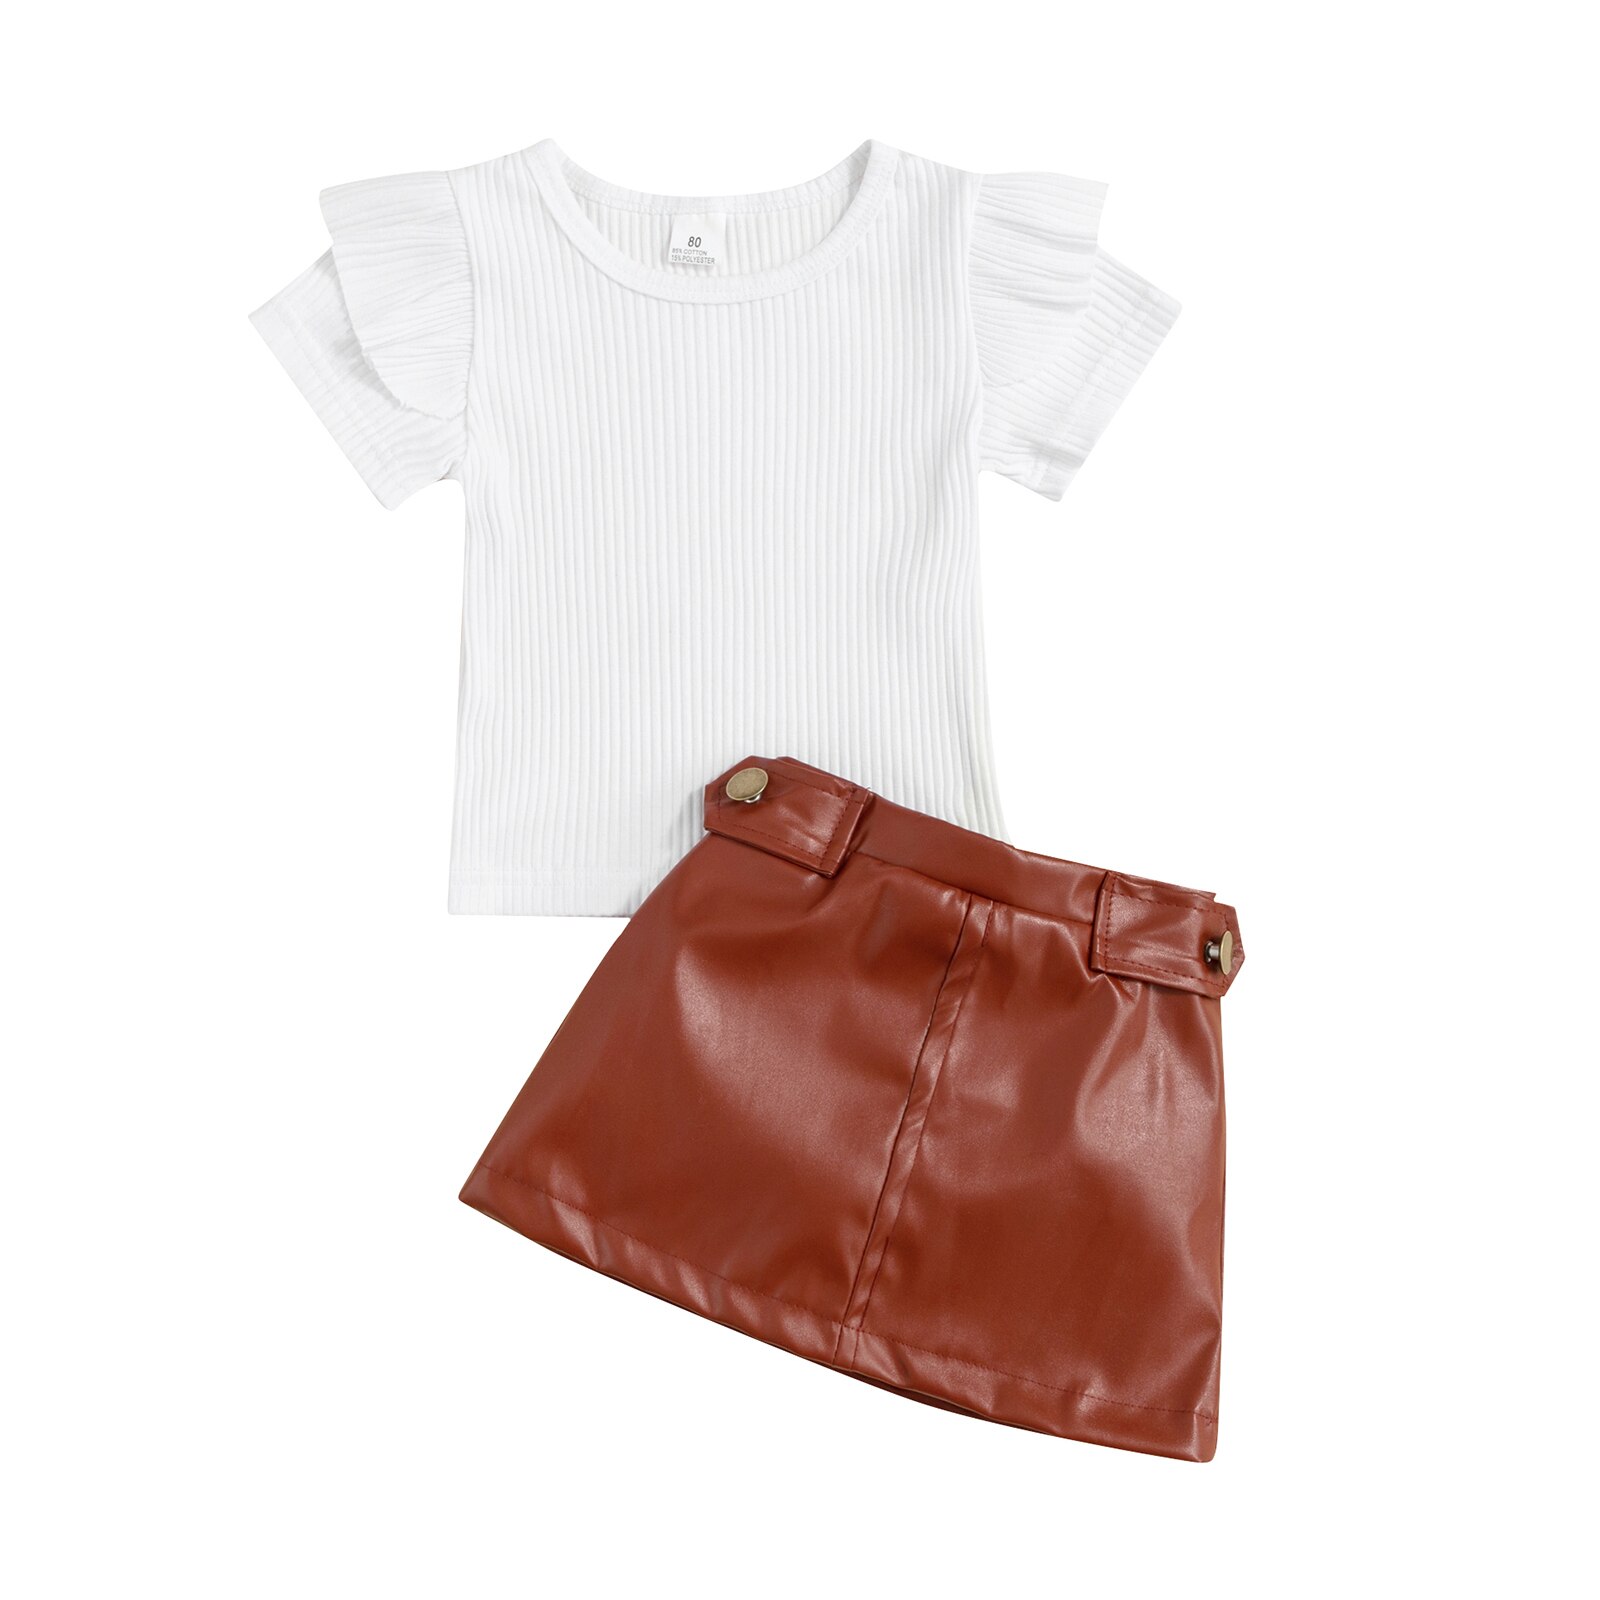 Citgeett-Summer-Kid-Baby-Girl-Clothes-Set-Solid-Color-Ribbed-Short-Sleeve-T-shirt-PU-Leather-5